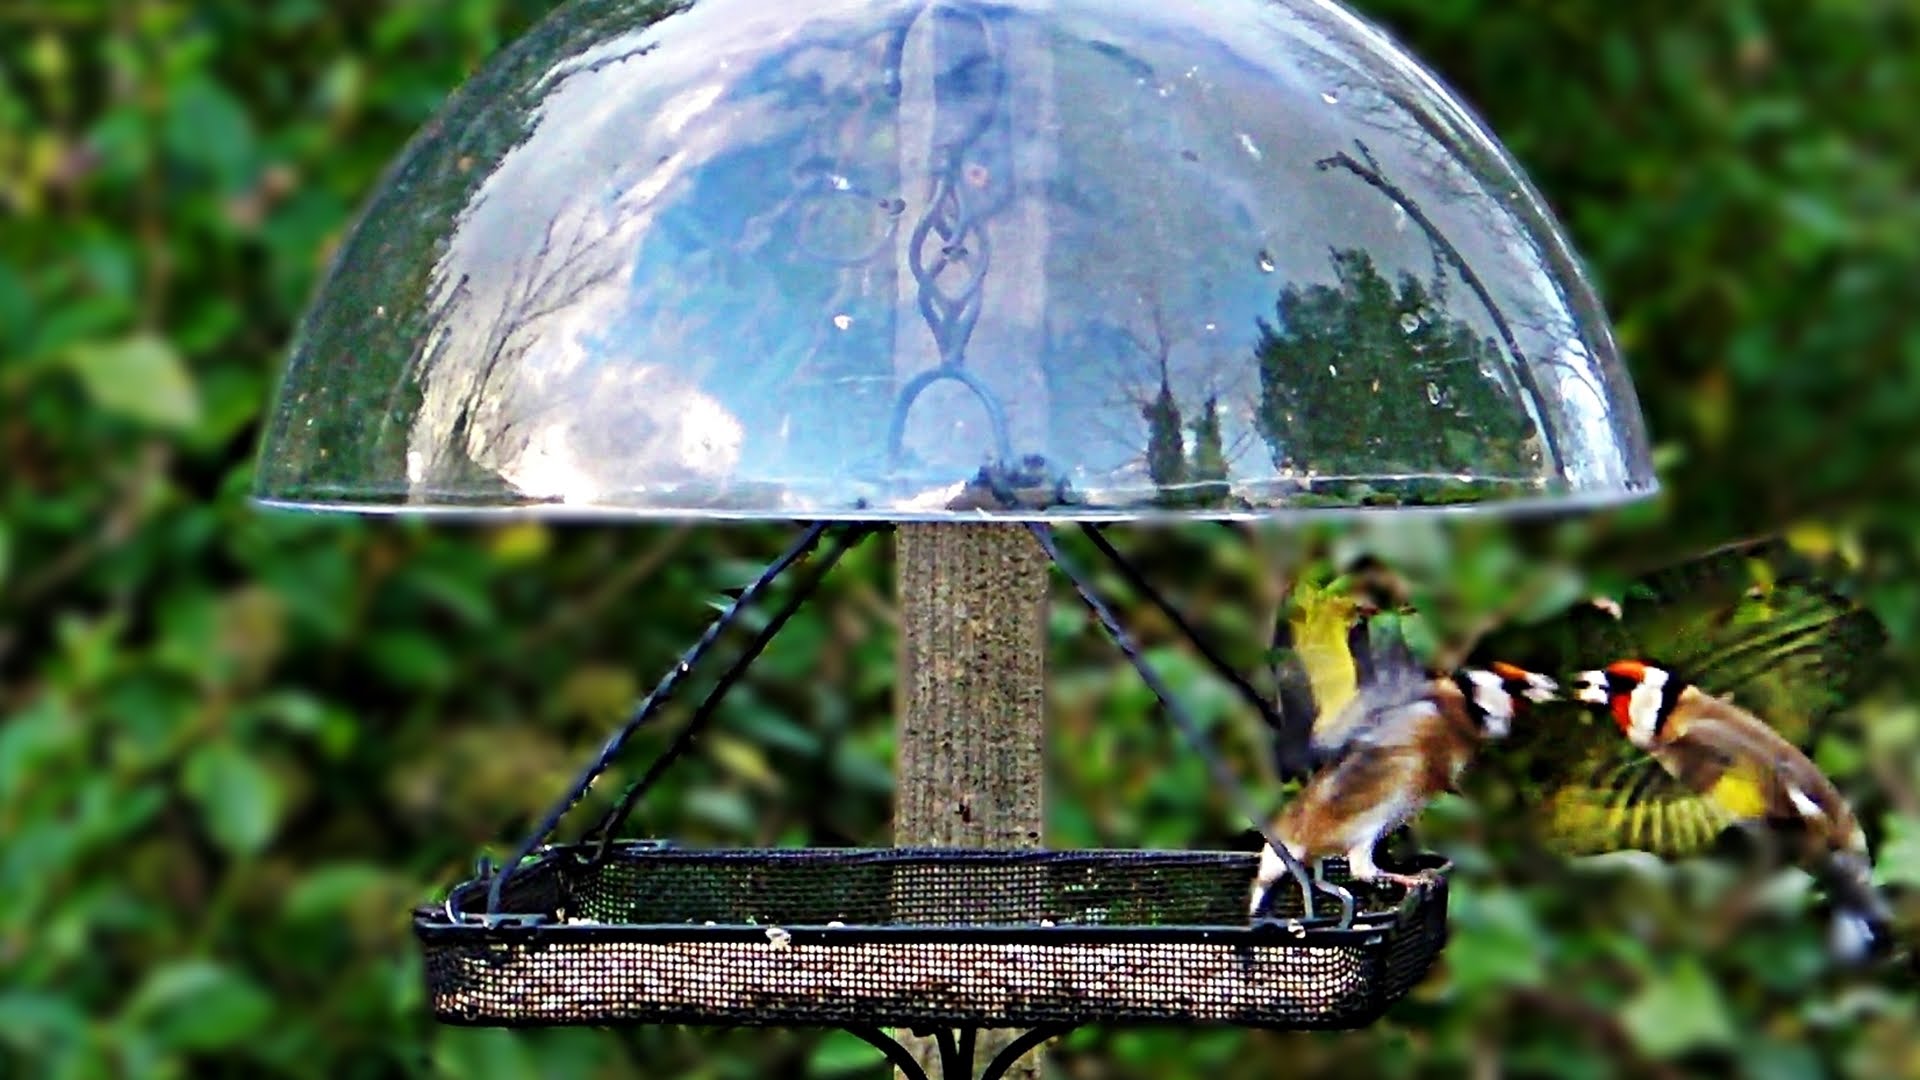 Goldfinch Squabble at The Dome Bird Feeder - YouTube